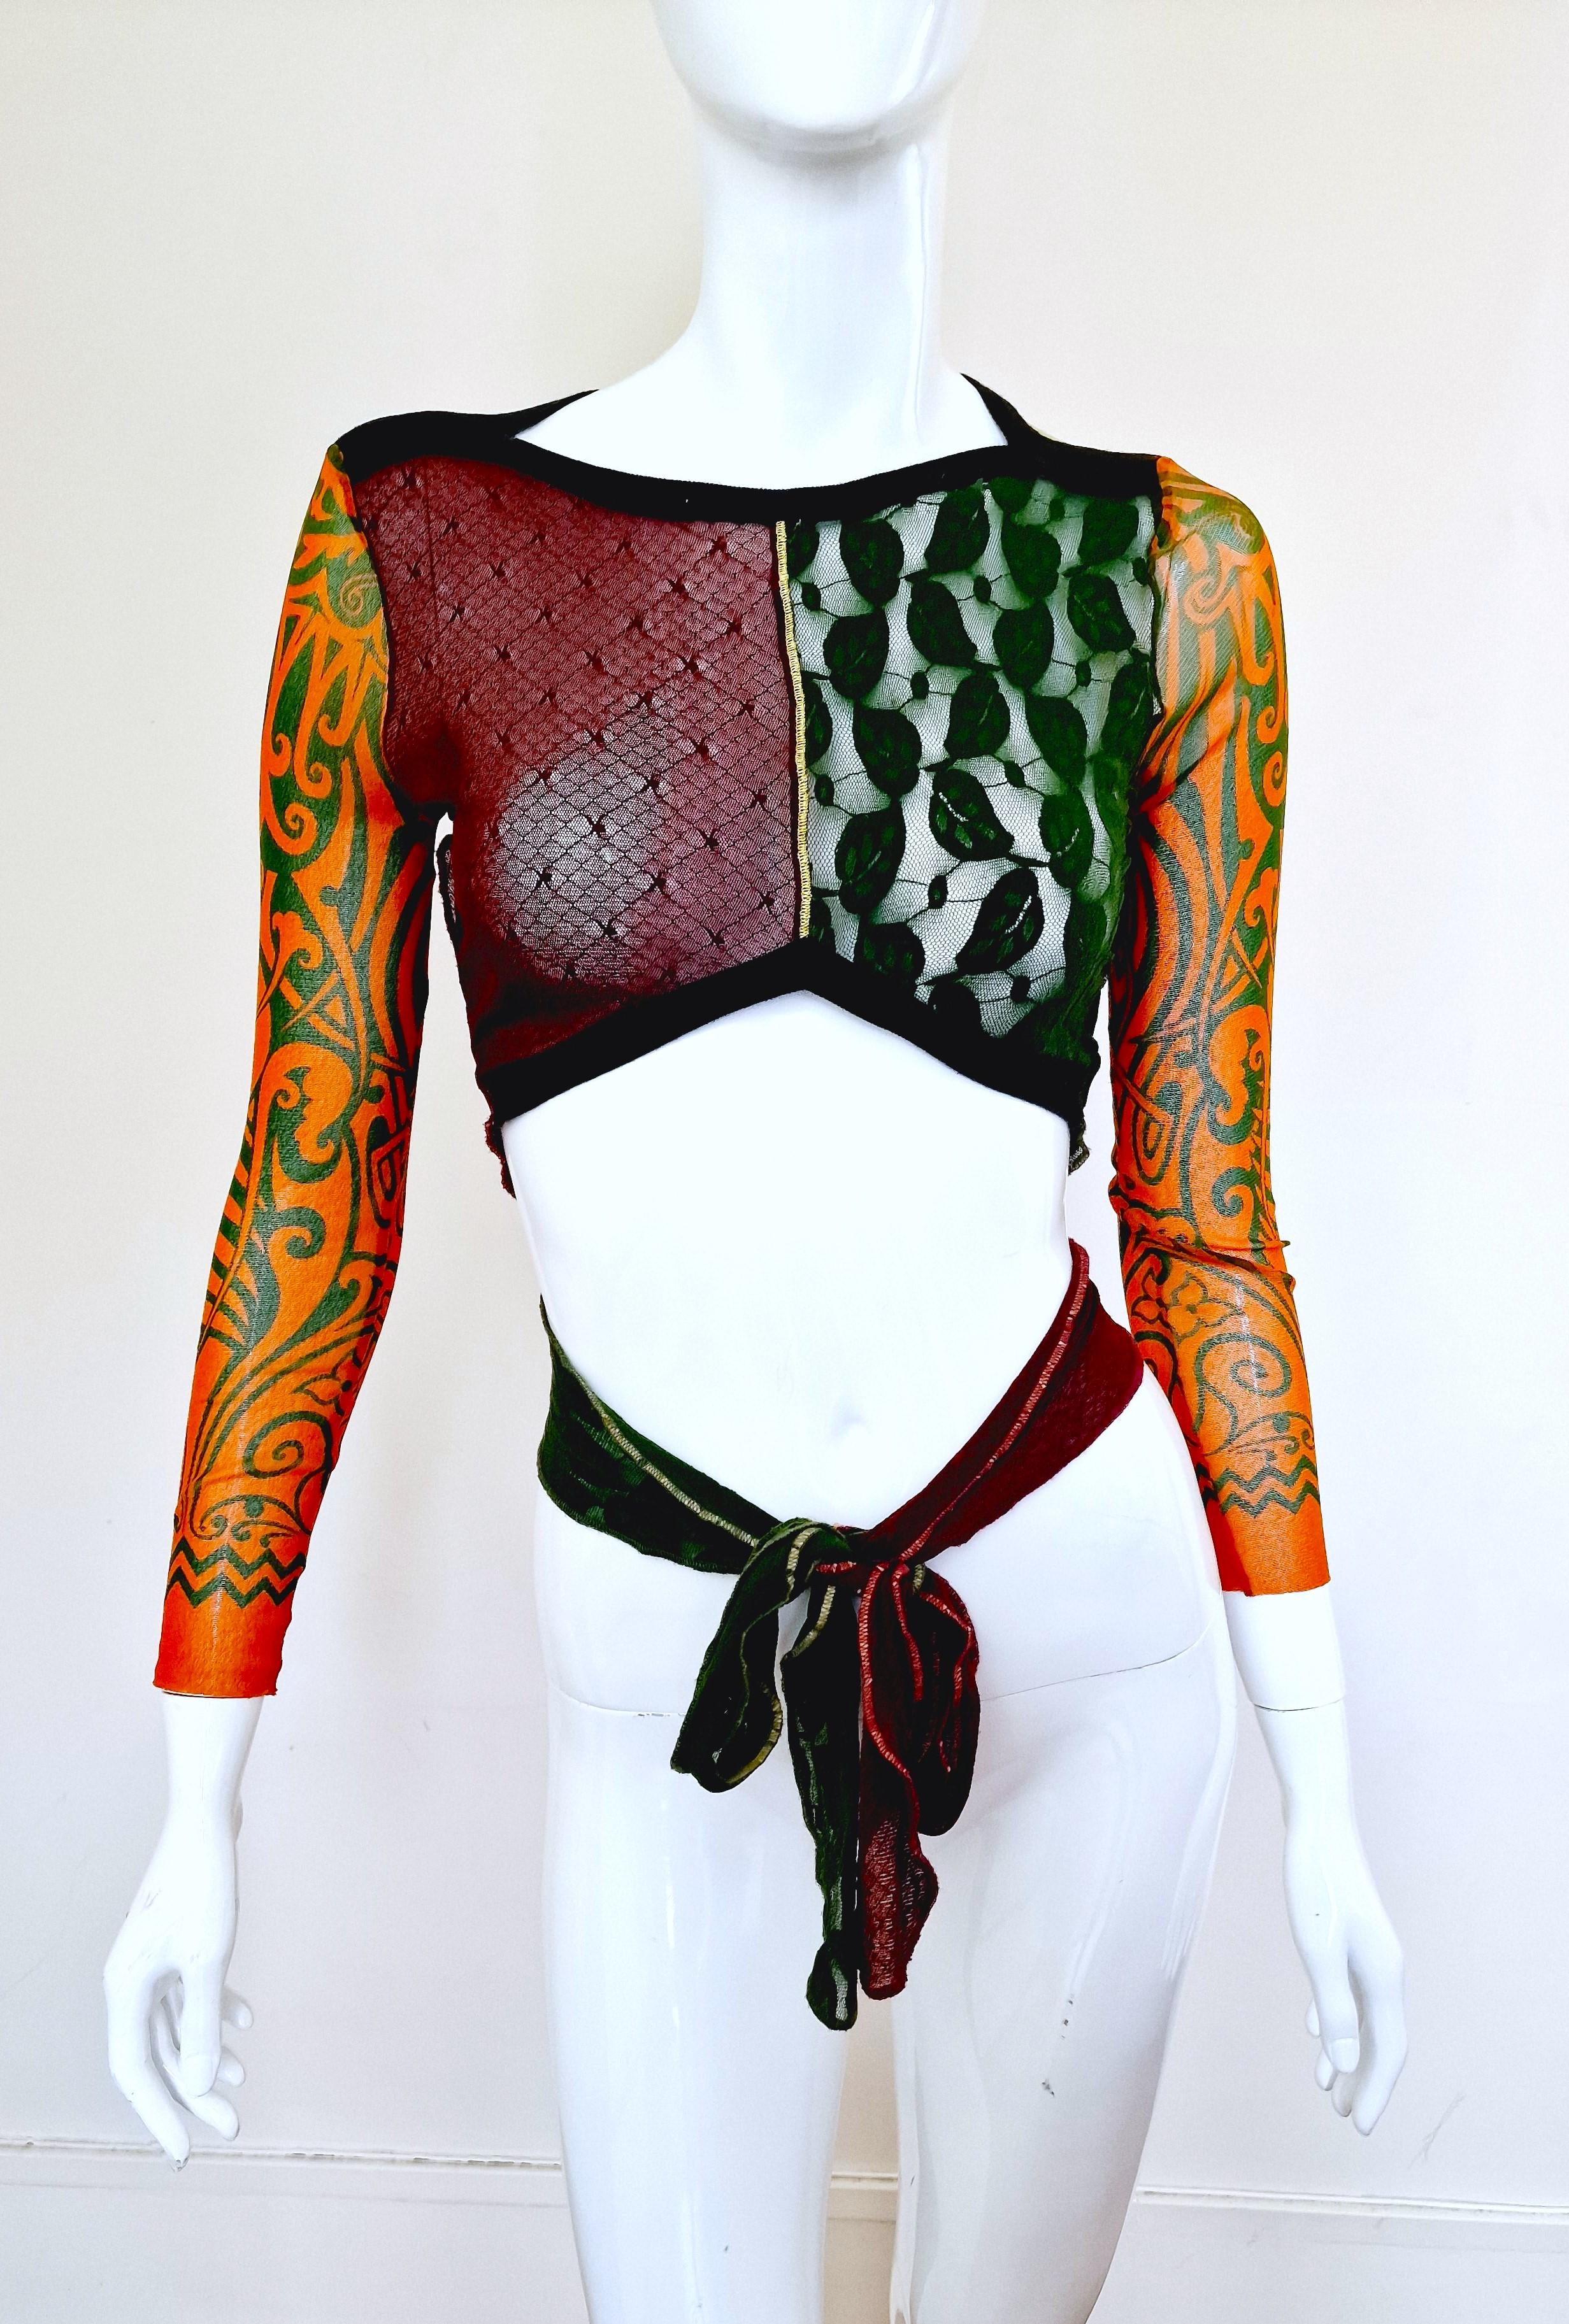 Iconic tattoo top by Jean Paul Gaultier!
From the 1996 S/S collection!
JEAN PAUL GAULTIER Maille vintage iconic and rare tattoo pattern. Colour block lace front, mesh tattooed sleeves and back. 
You can wrap it with different